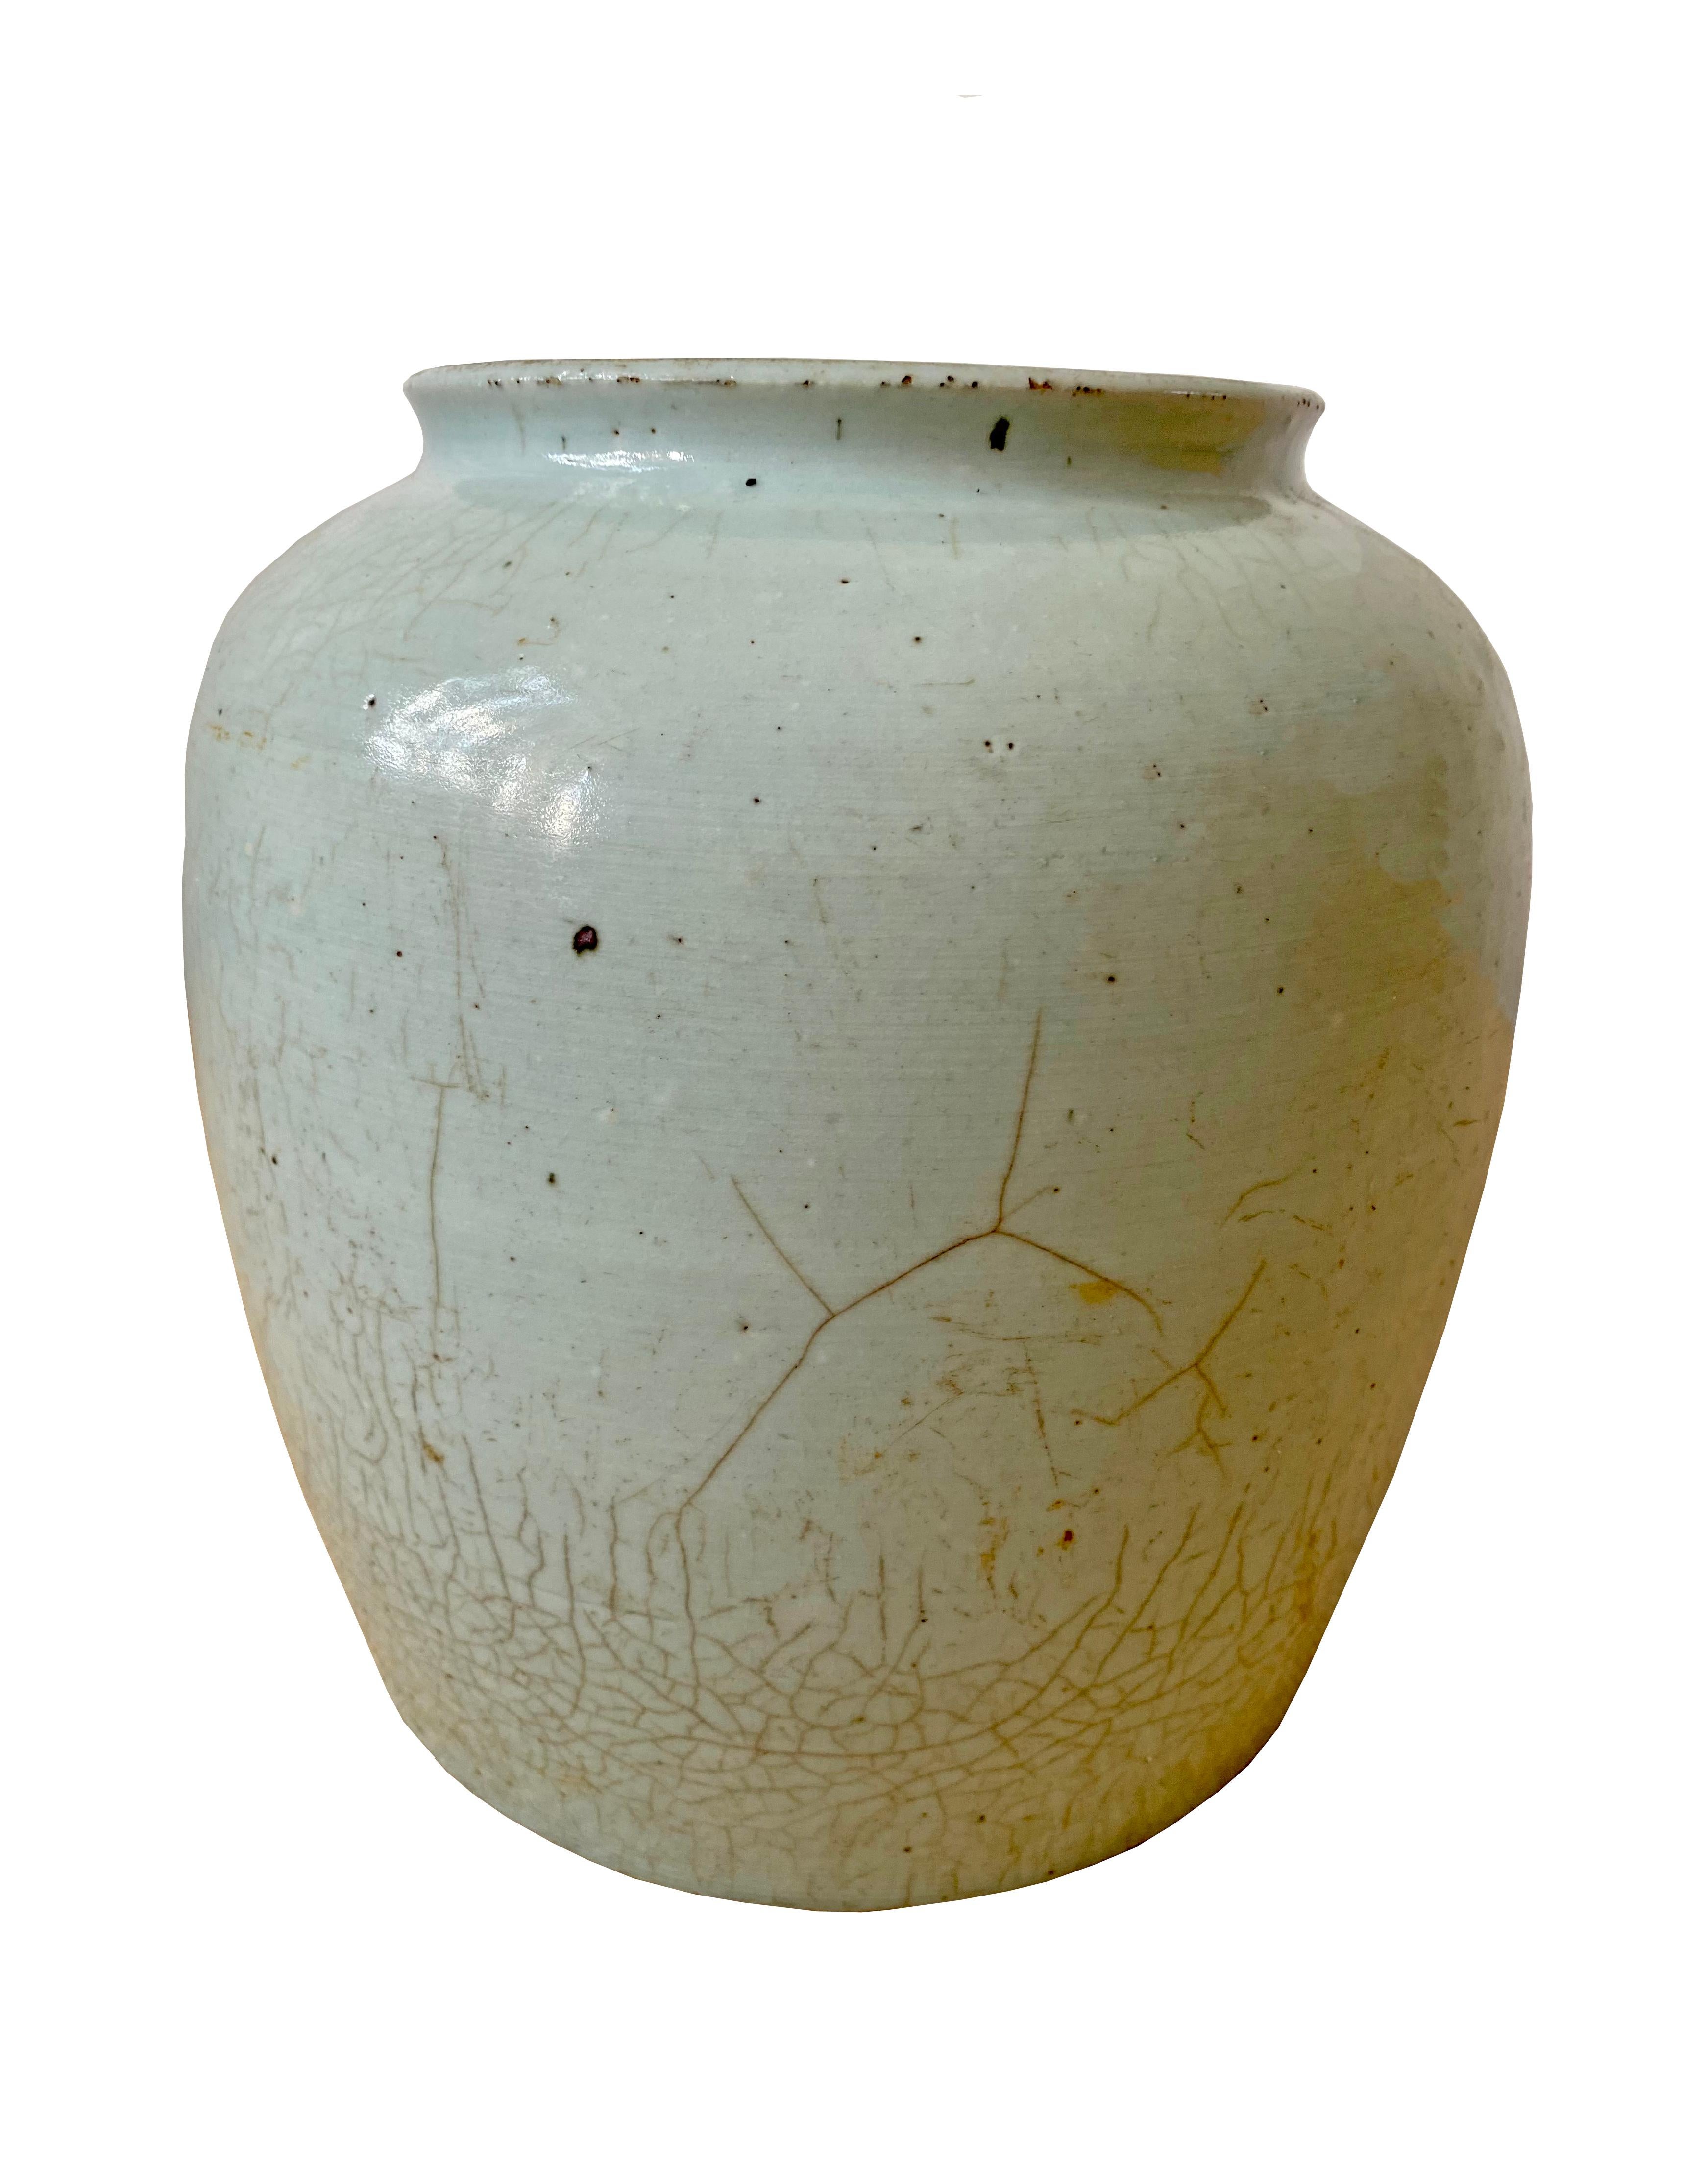 This pot is a Longquan celadon ceramic pot from Zhejian provence in south China. It has a beautiful cracked glaze and light green hue.

Dimensions Height 27.5cm x width 26cm.